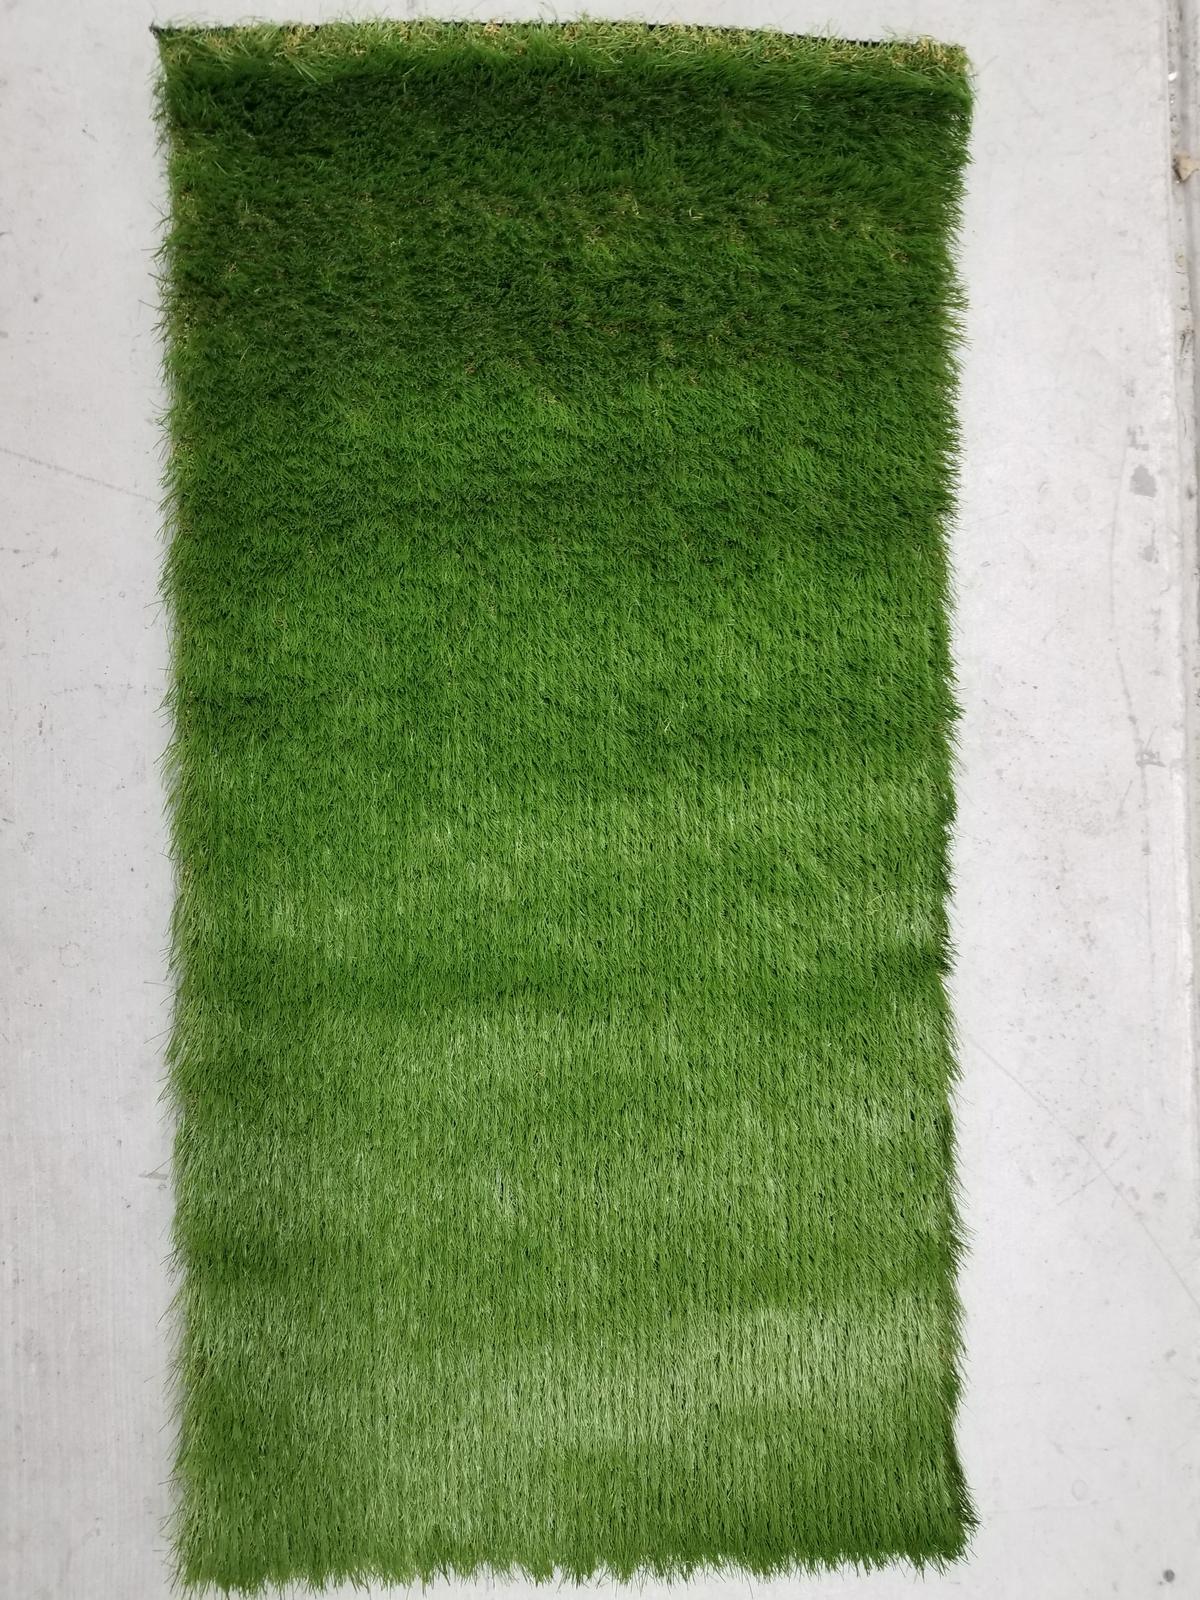 2'x4' Faux Grass / Turf - Perfect for RVs - New